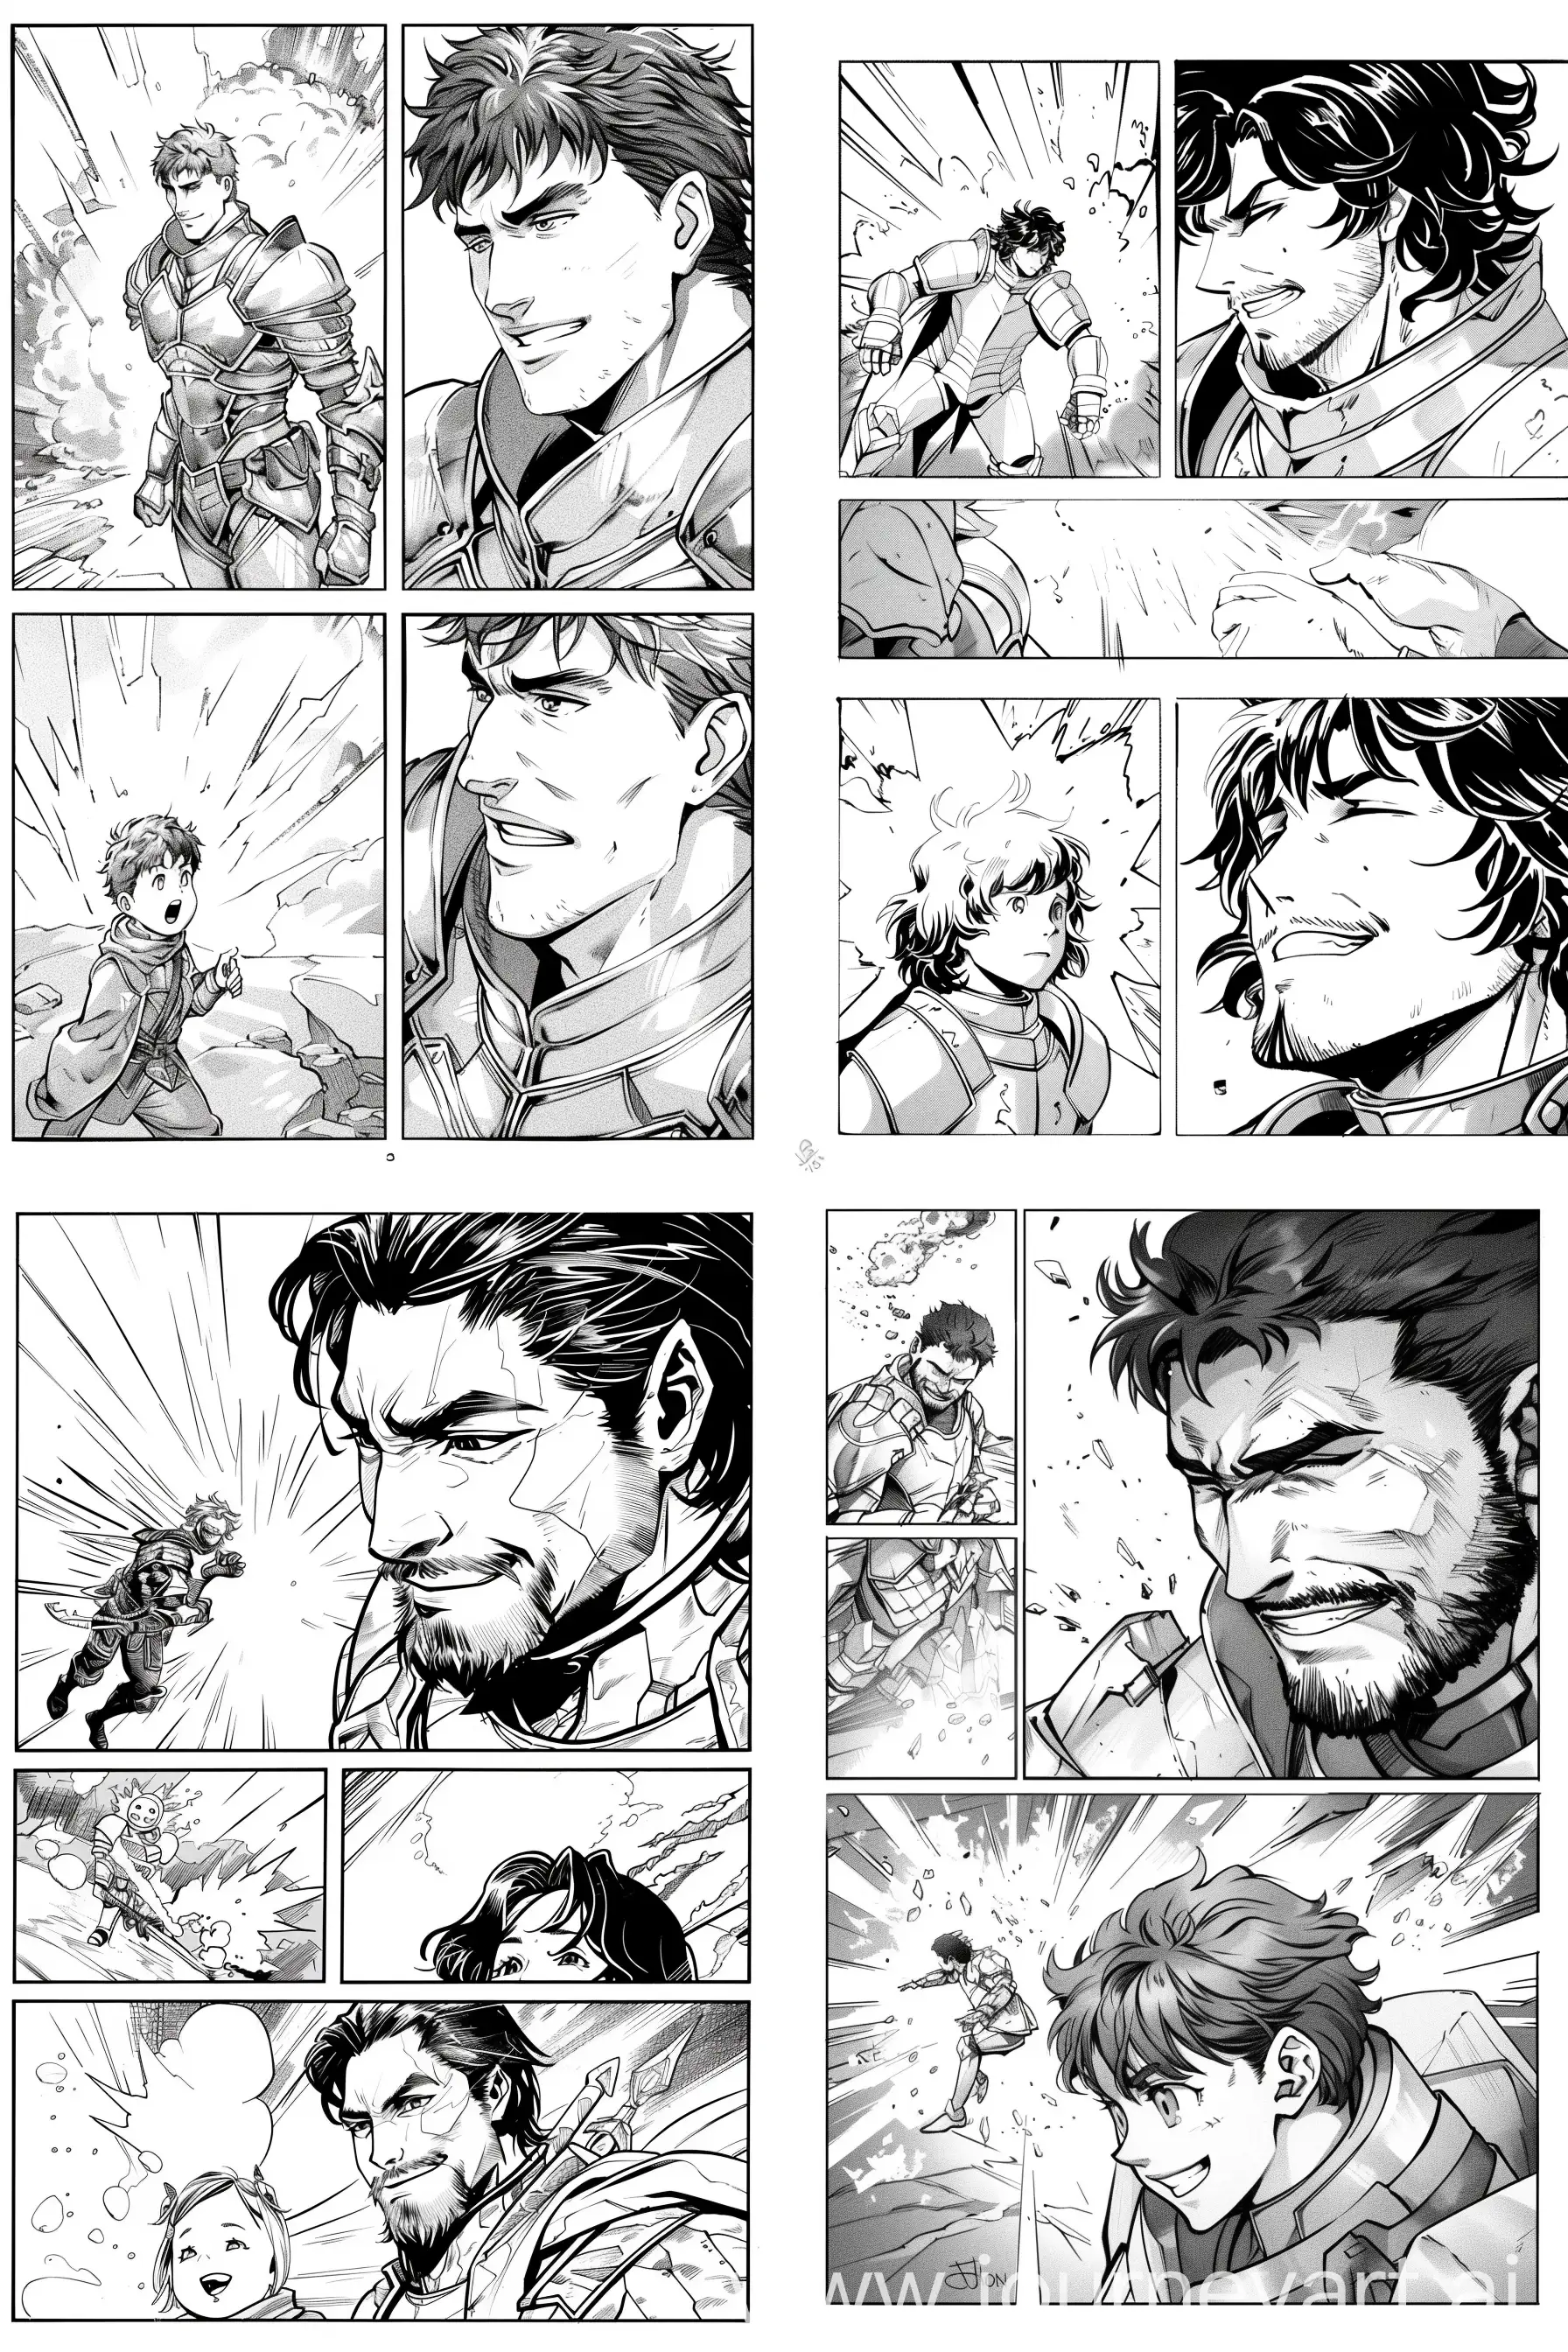 Manga style page,create 4 or 5 pictures,black and white, a legendary hero who is about 28 years old has a small nose and a defined jawline,normal type of eyes,wearing a legendary armor saves a small Child from a explosion,the hero showcased his smile towards the child,avoid distortion. --ar 2:3 